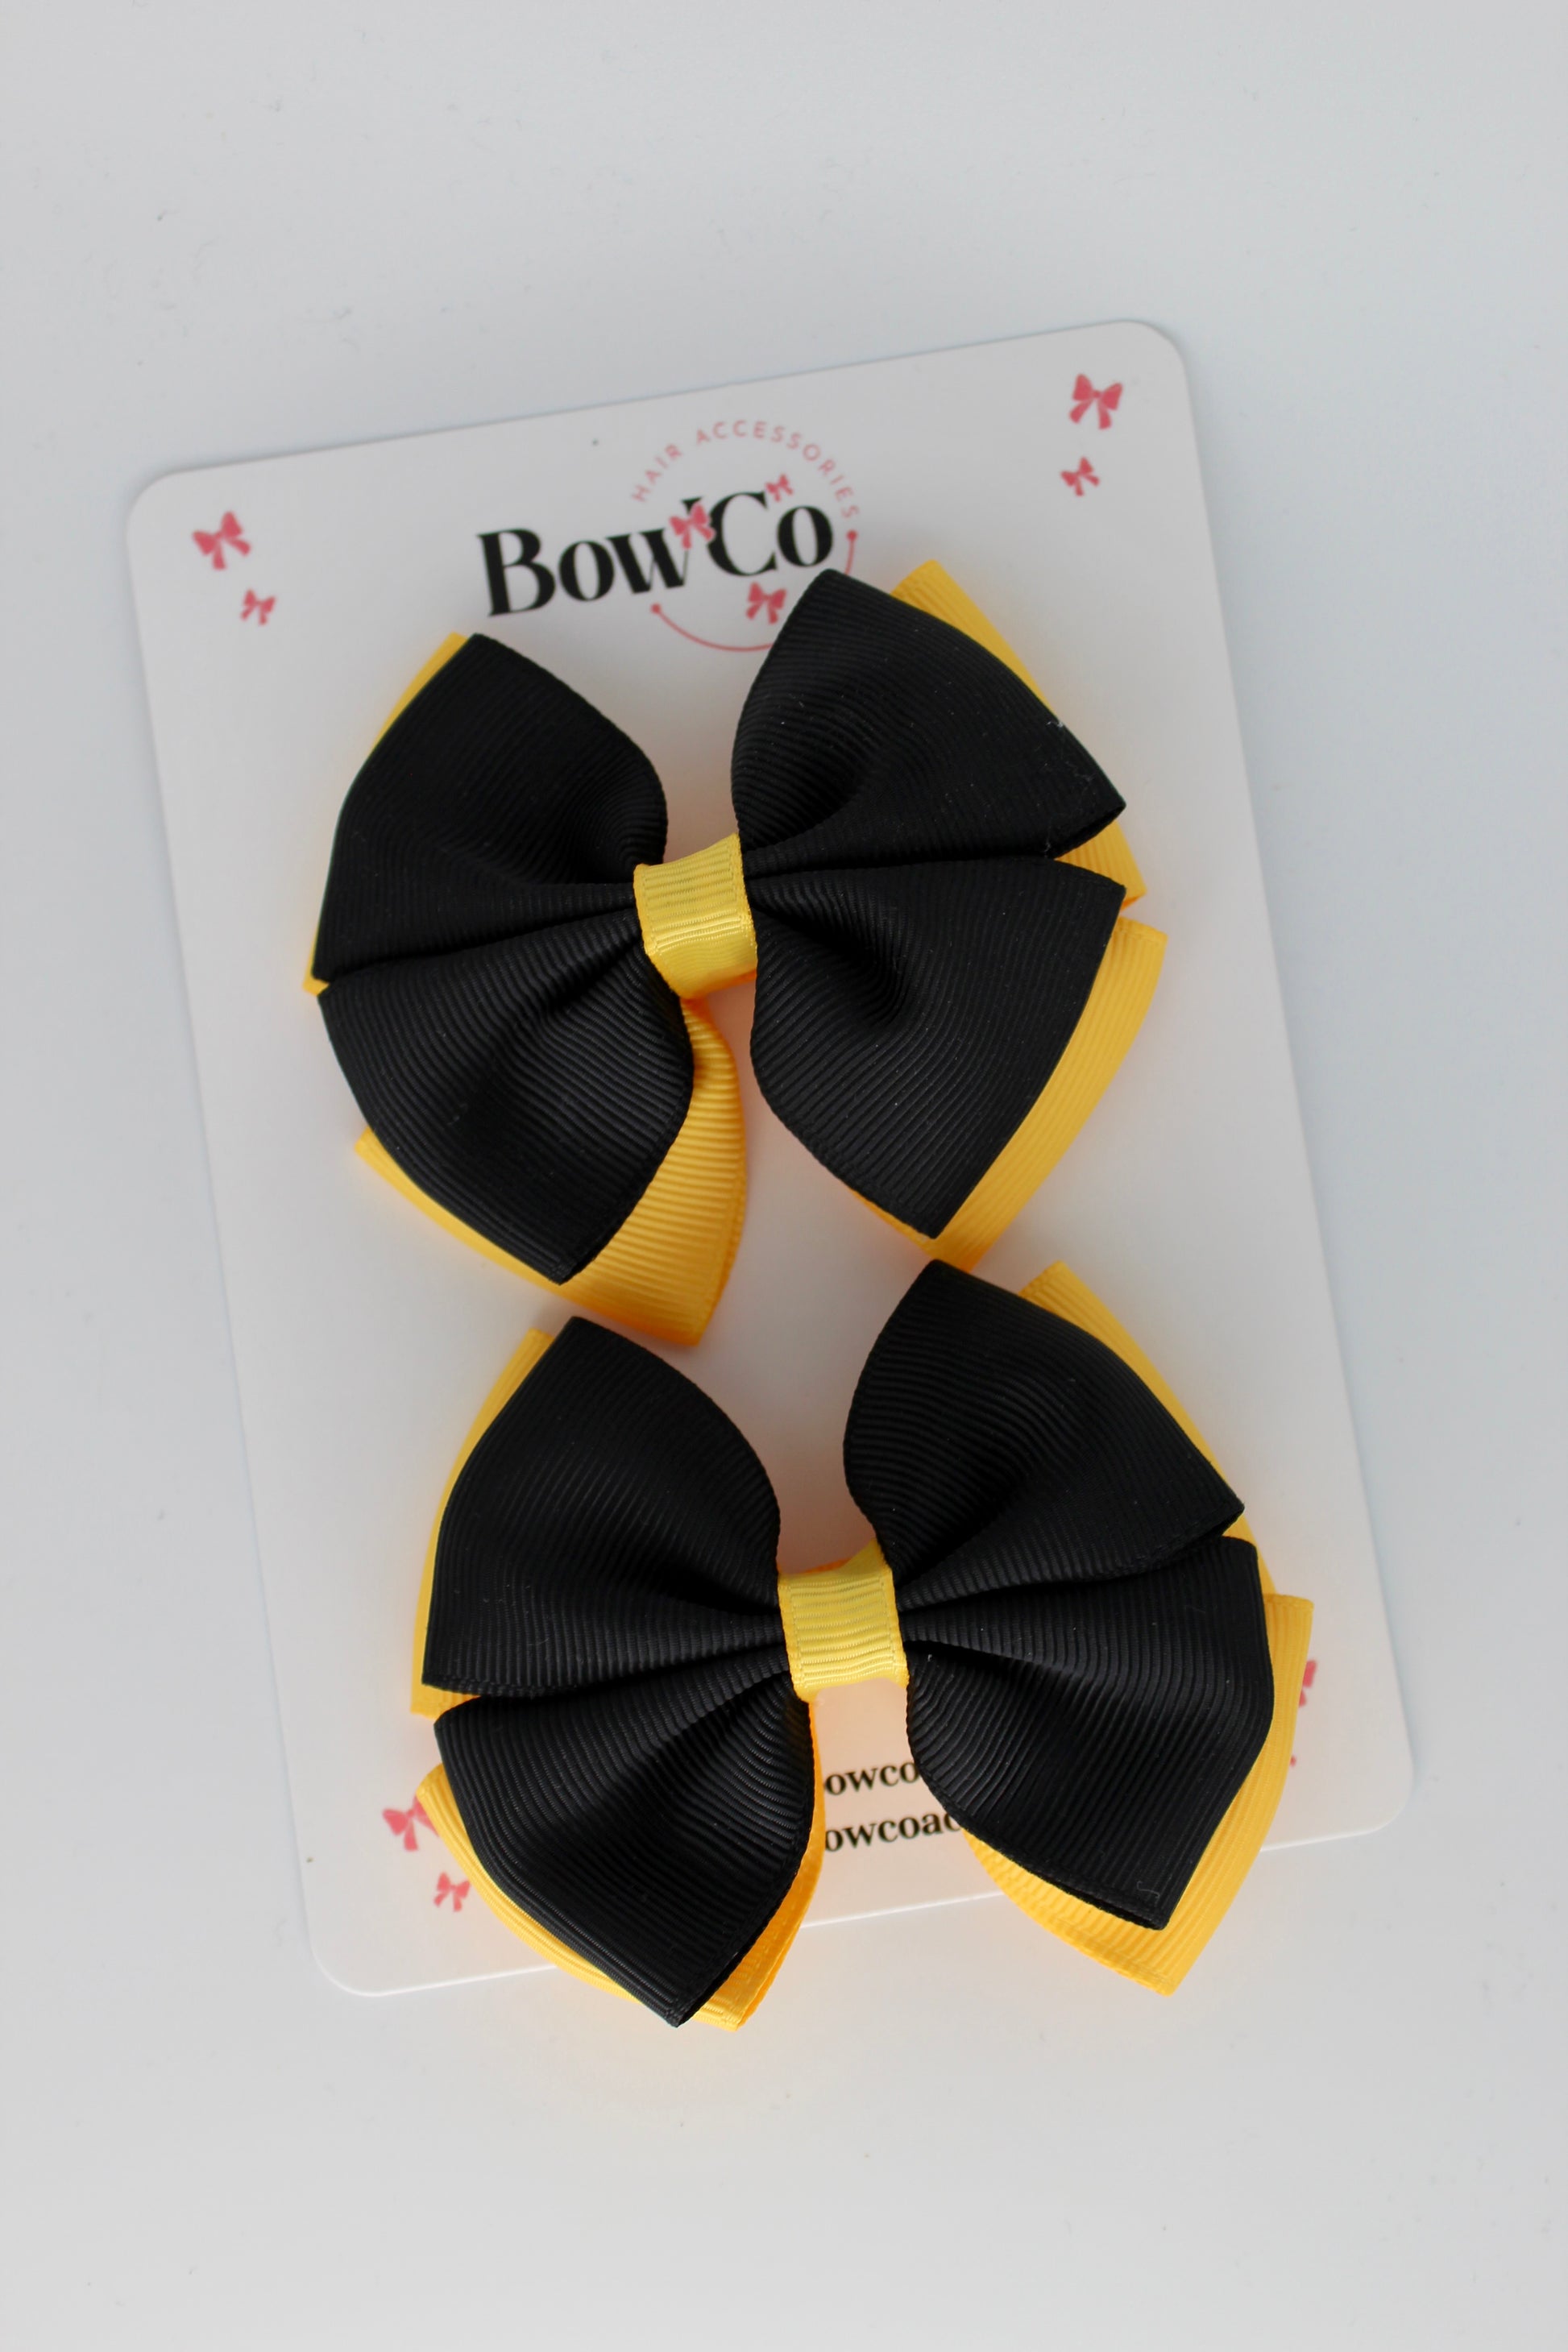 3 Inch Double Layer Bow - Clip - Black & Yellow Gold - 2 Pack